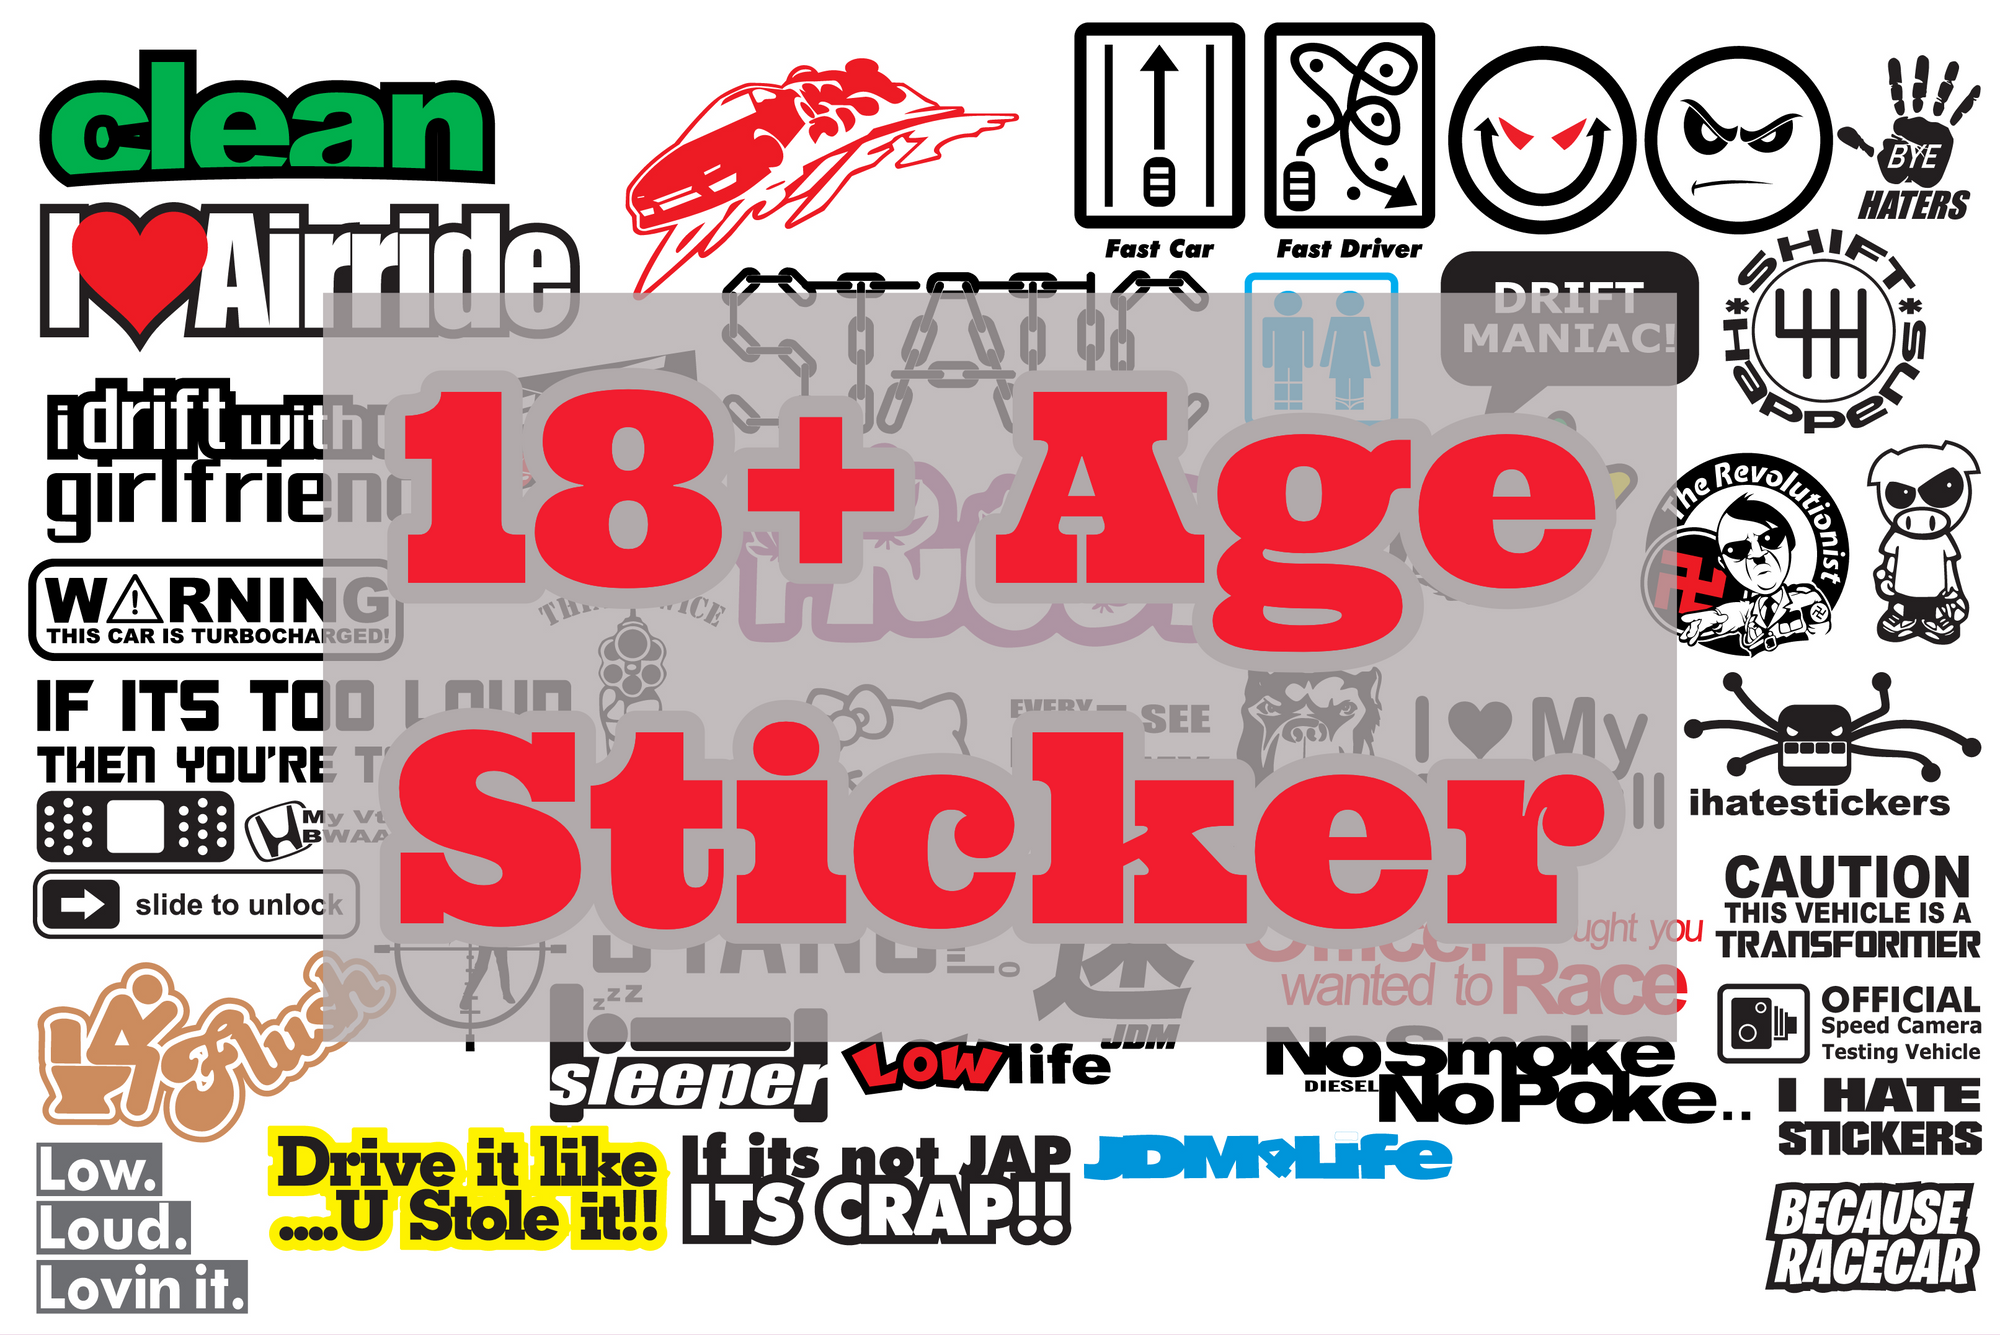 Sticker (rated PG-X) - TKT